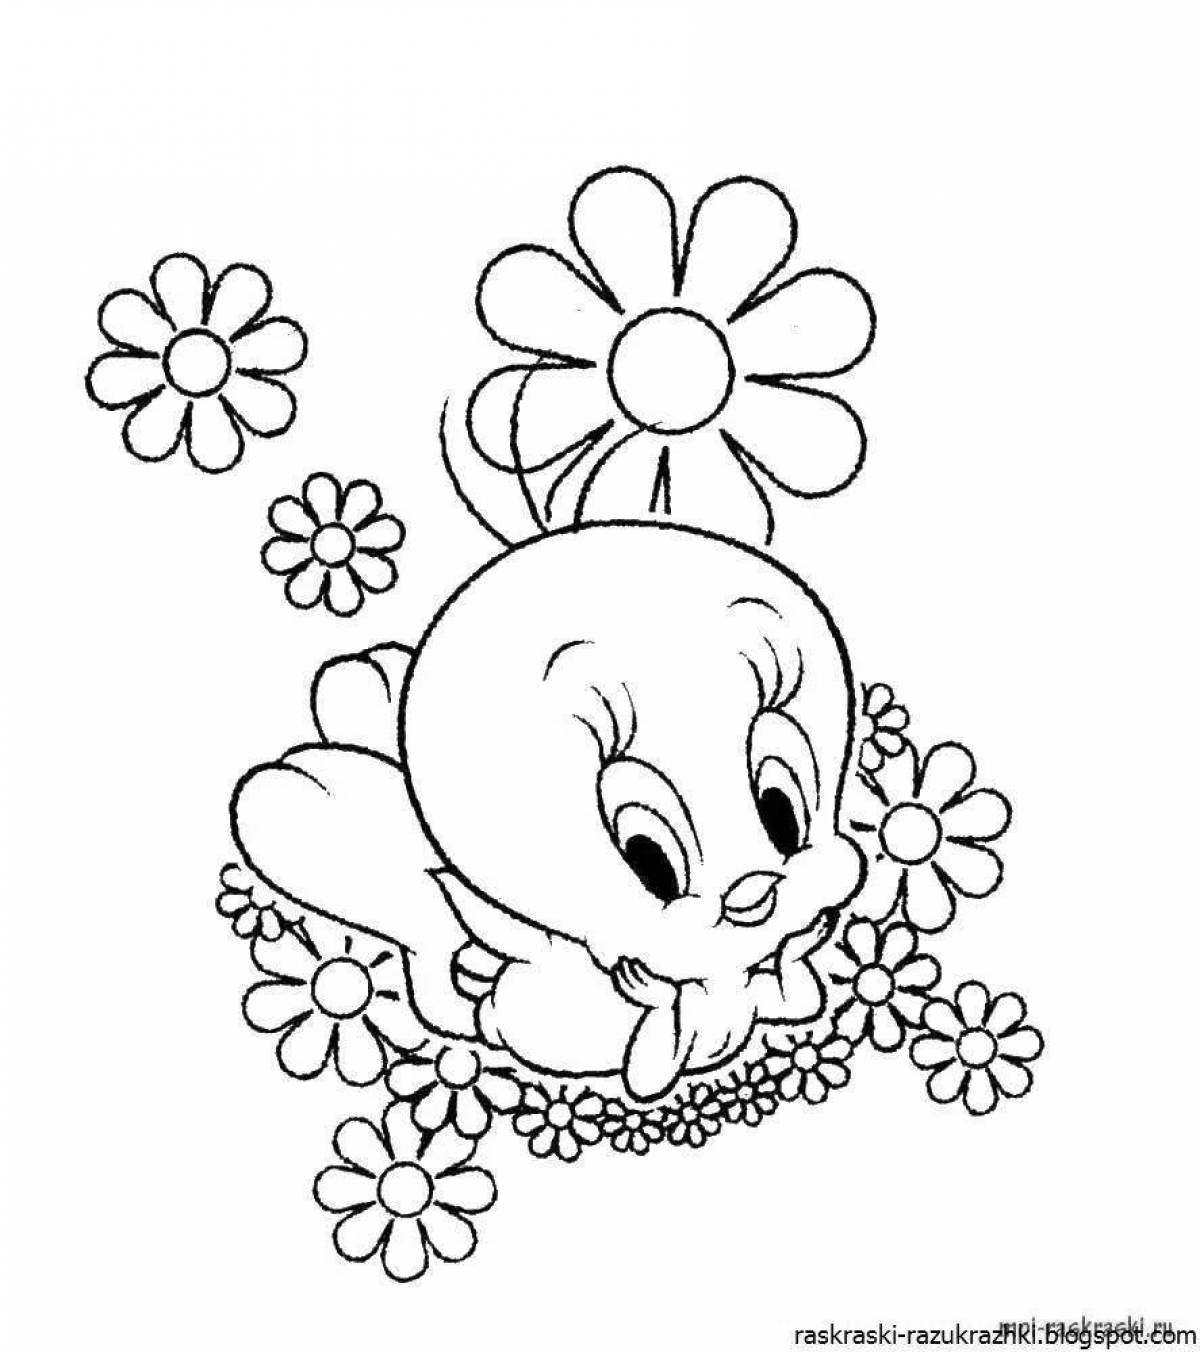 Radiant coloring page various beautiful